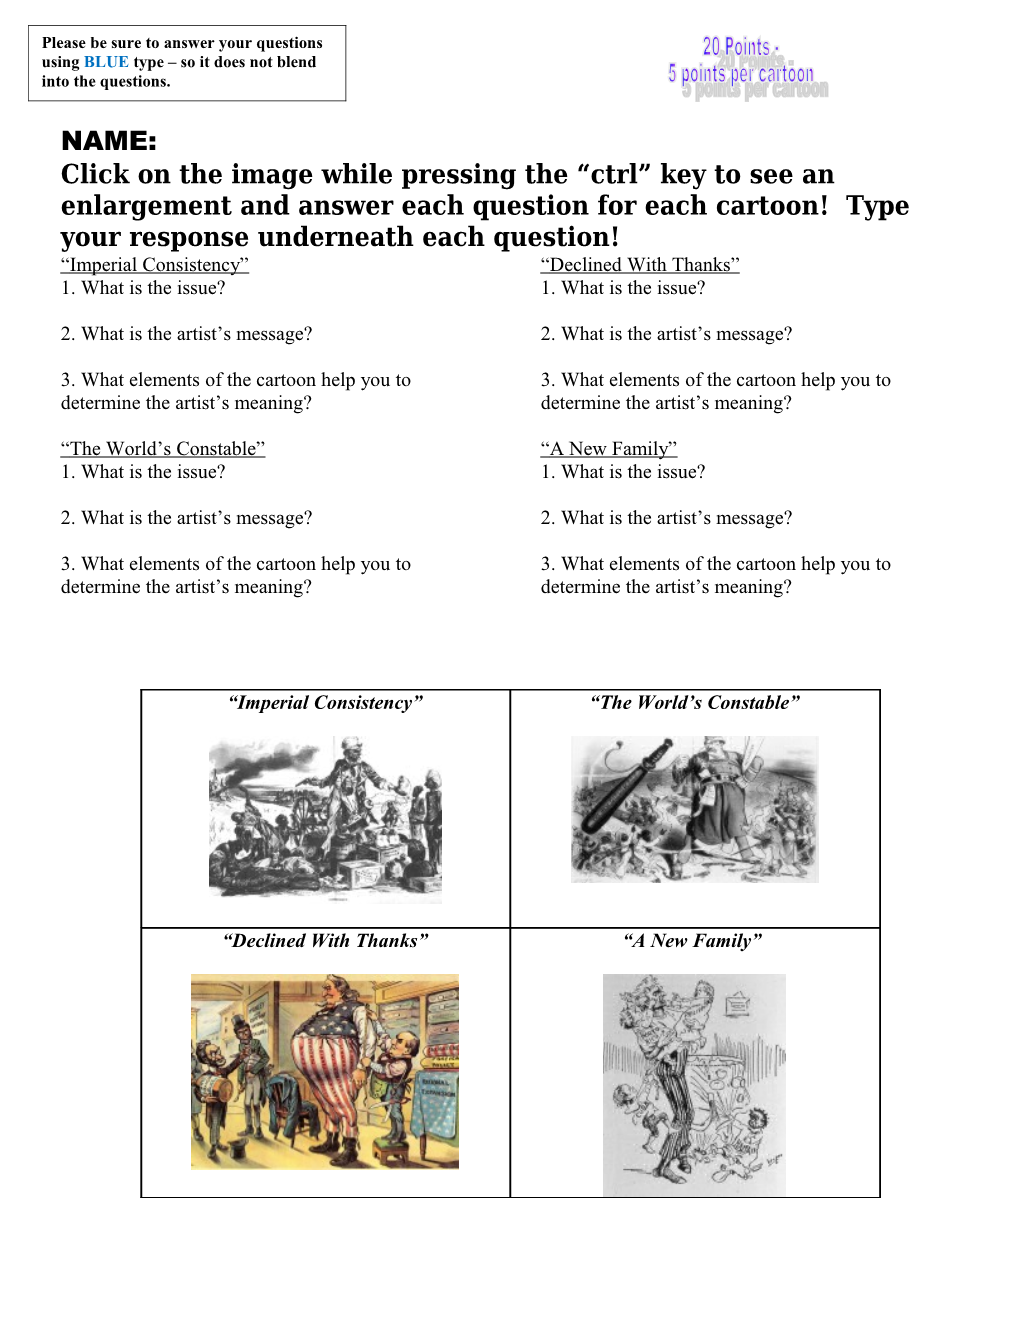 Click on the Image to See an Enlargement and Answer Each Question for Each Cartoon